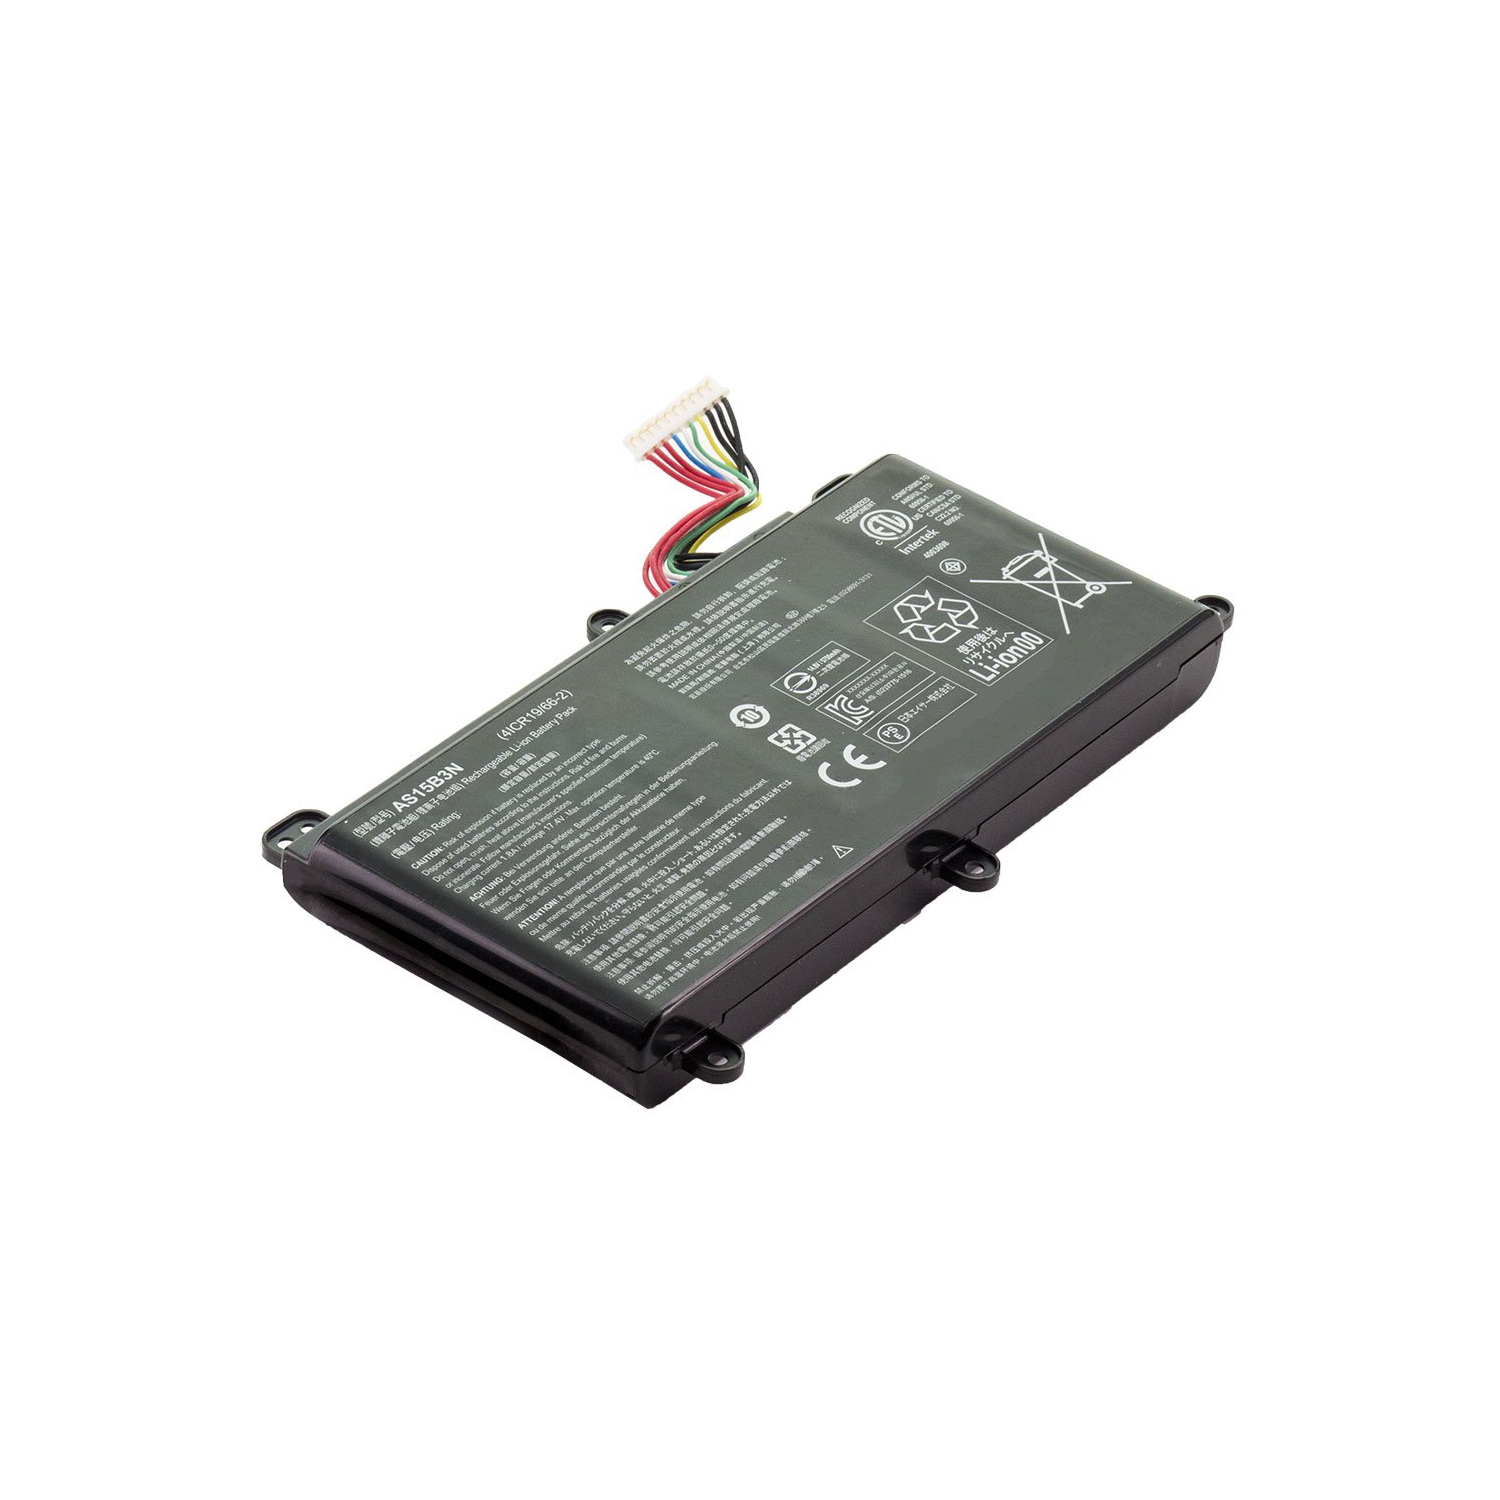 Laptop Battery Replacement for Acer Predator 15 G9-593-735L, AS15B3N, KT.00803.004, KT.00803.005